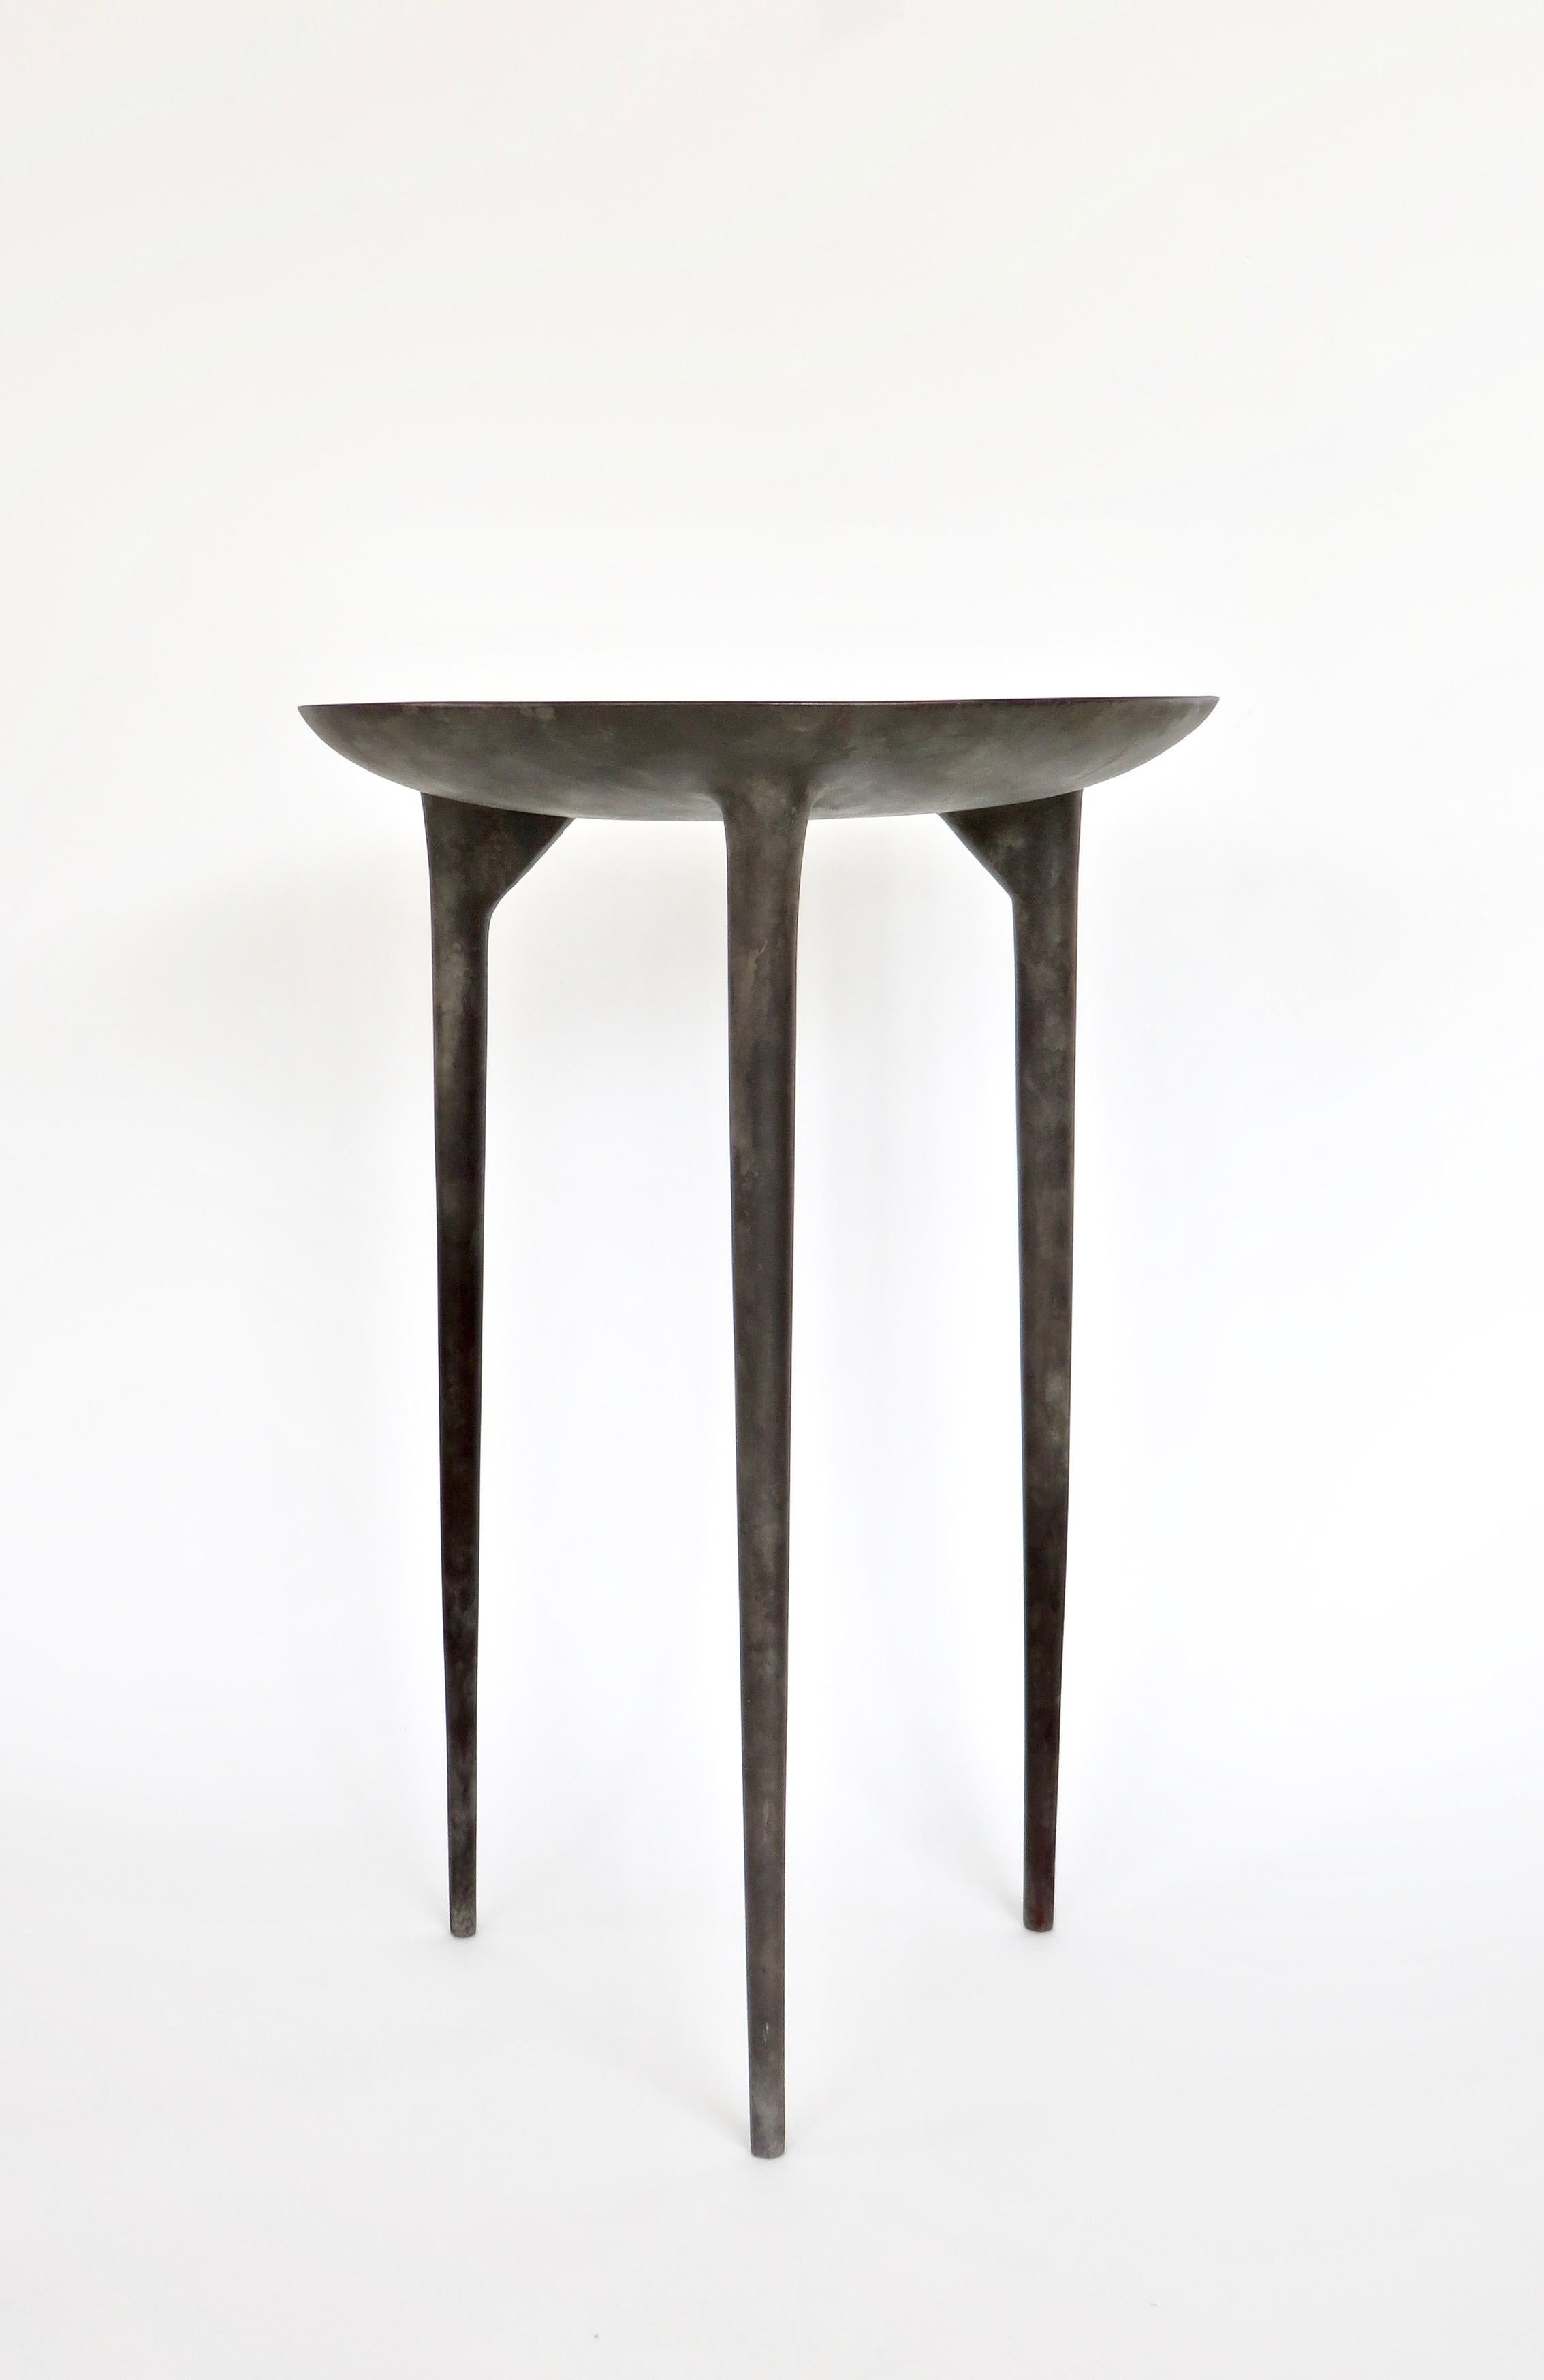 Handmade tall three-legged bronze brazier side table from the Rick Owens home collection. 'Tall Brazier' three-legged table in solid bronze with nitrate finish shown.
Signed Rick Owens. 
Also available in black finish by special order. 
Please note